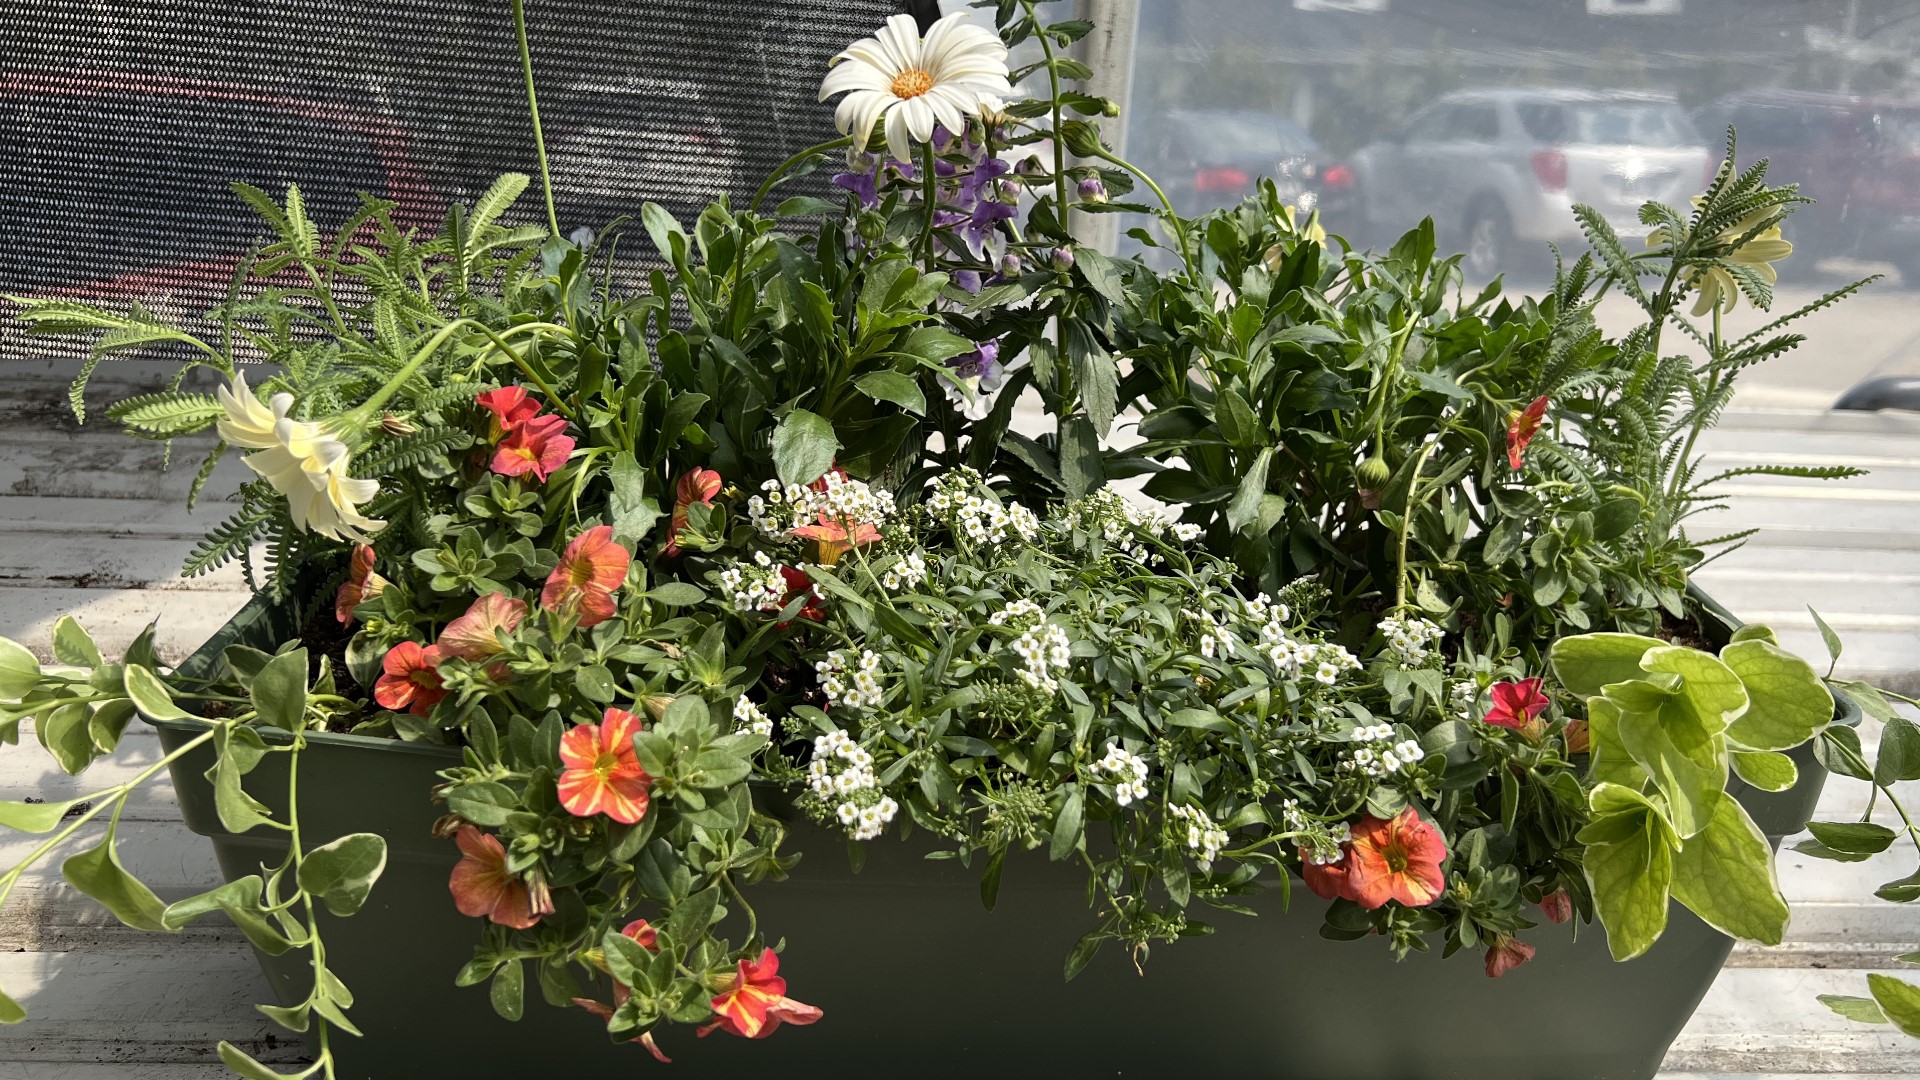 Gardening with Gutner learns all the tricks to creating beautiful window boxes and containers.